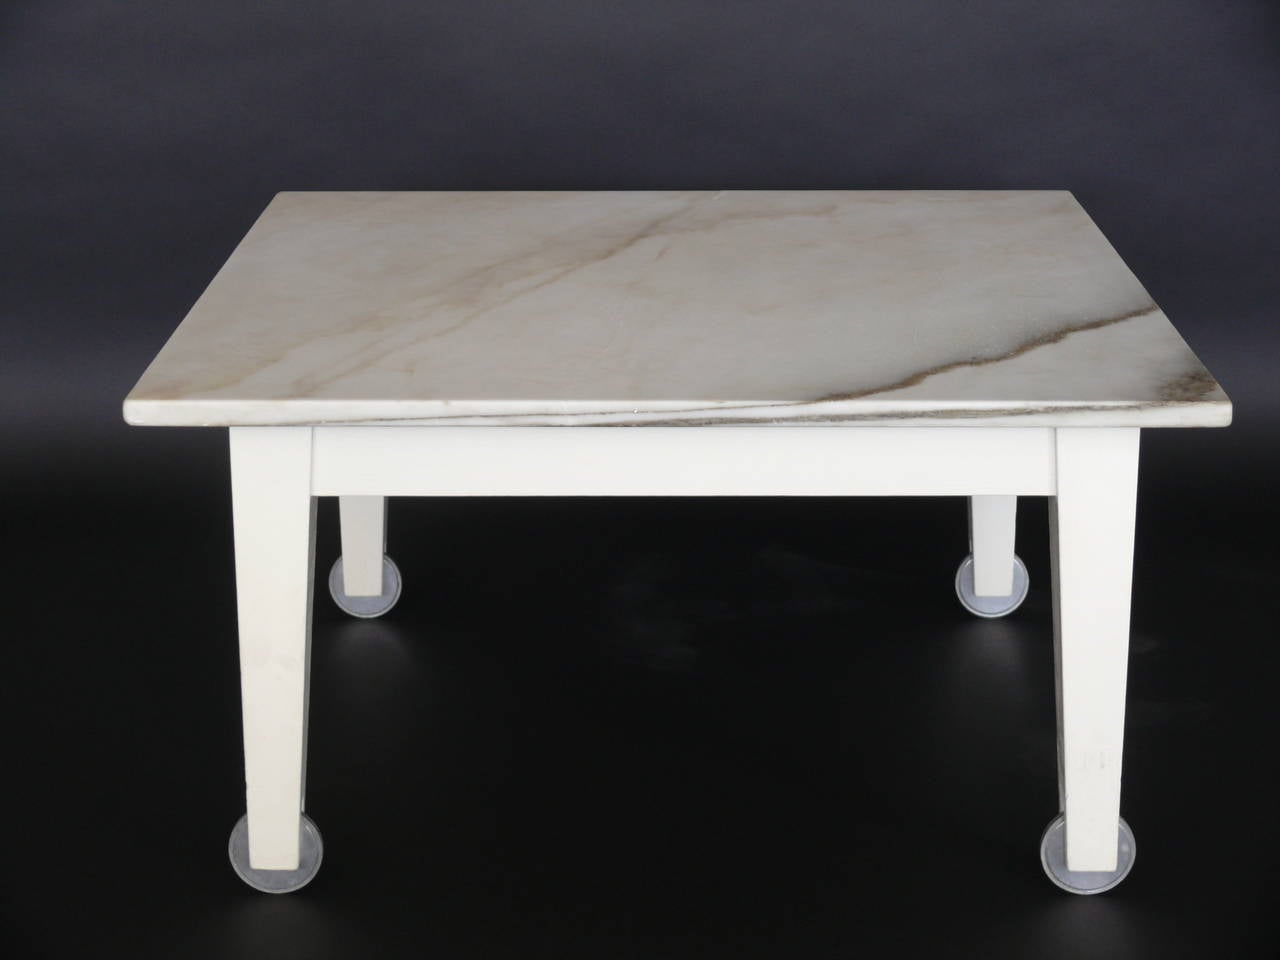 Coffee table designed by Phillipe Starck for the Delano Hotel in 1980. Wood base with inset wheels and Carrara marble top. Vintage condition with repaired crack in marble. Other matching items from the Delano Hotel also available.